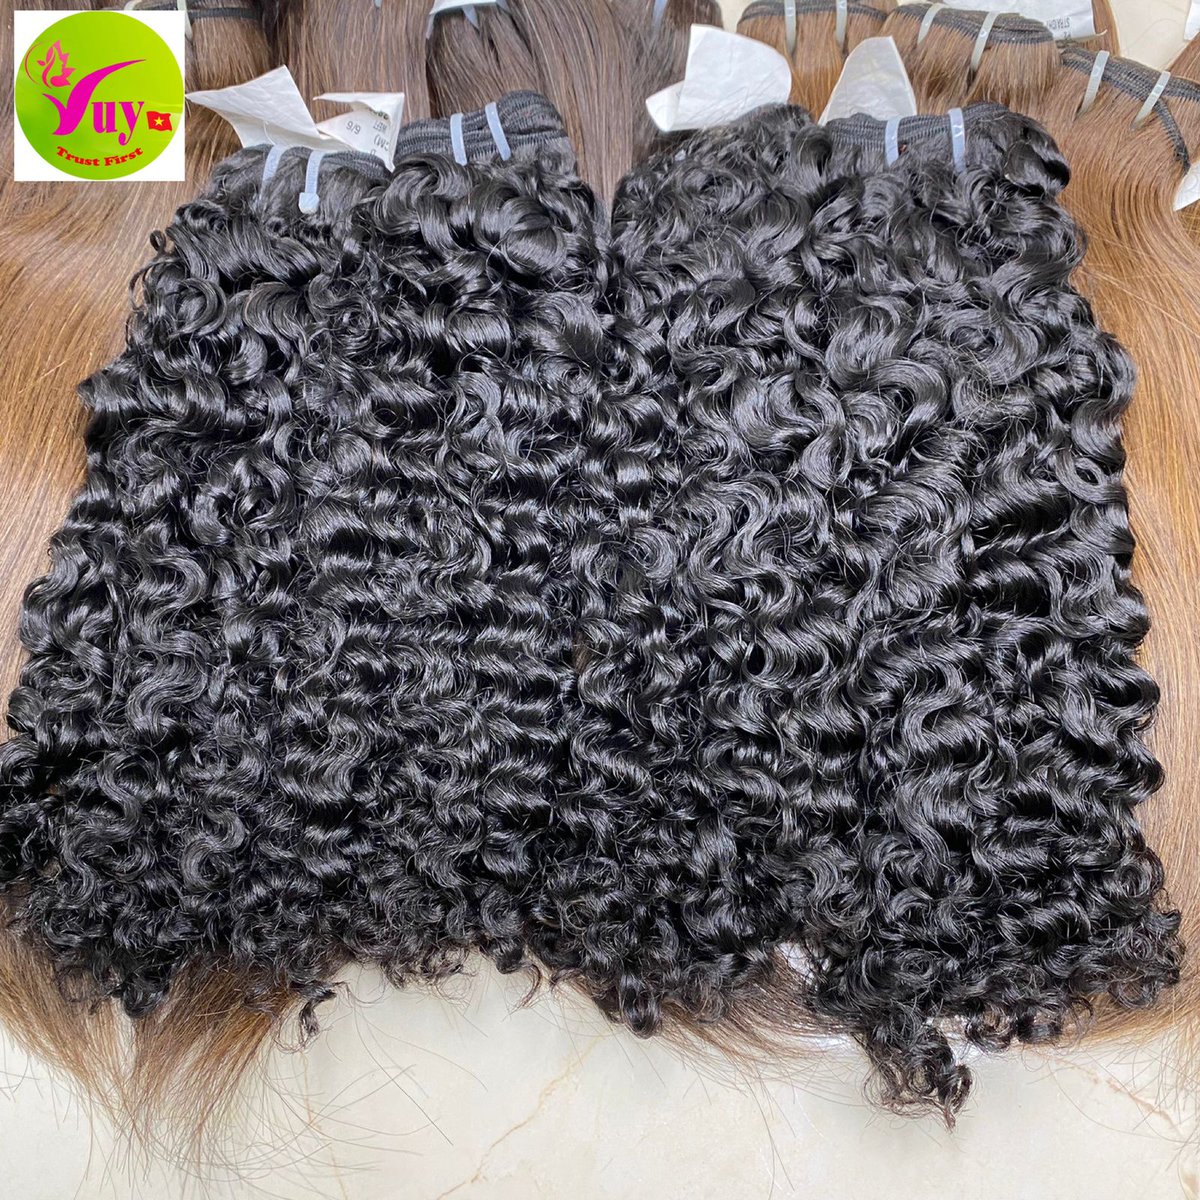 20” Sun Curly Hair Extensions From VUY VietNam
Contact with me on Whatsapp
😍+84 396092128.
#minktresses #rawhairbundles #rawhair #hairboutique #dmvhair #bmorehair #indriahair #rawhairextensions #bundles #rawhairvendor #rawhairs #protectivestyles #rawhairwholesale #lacefront